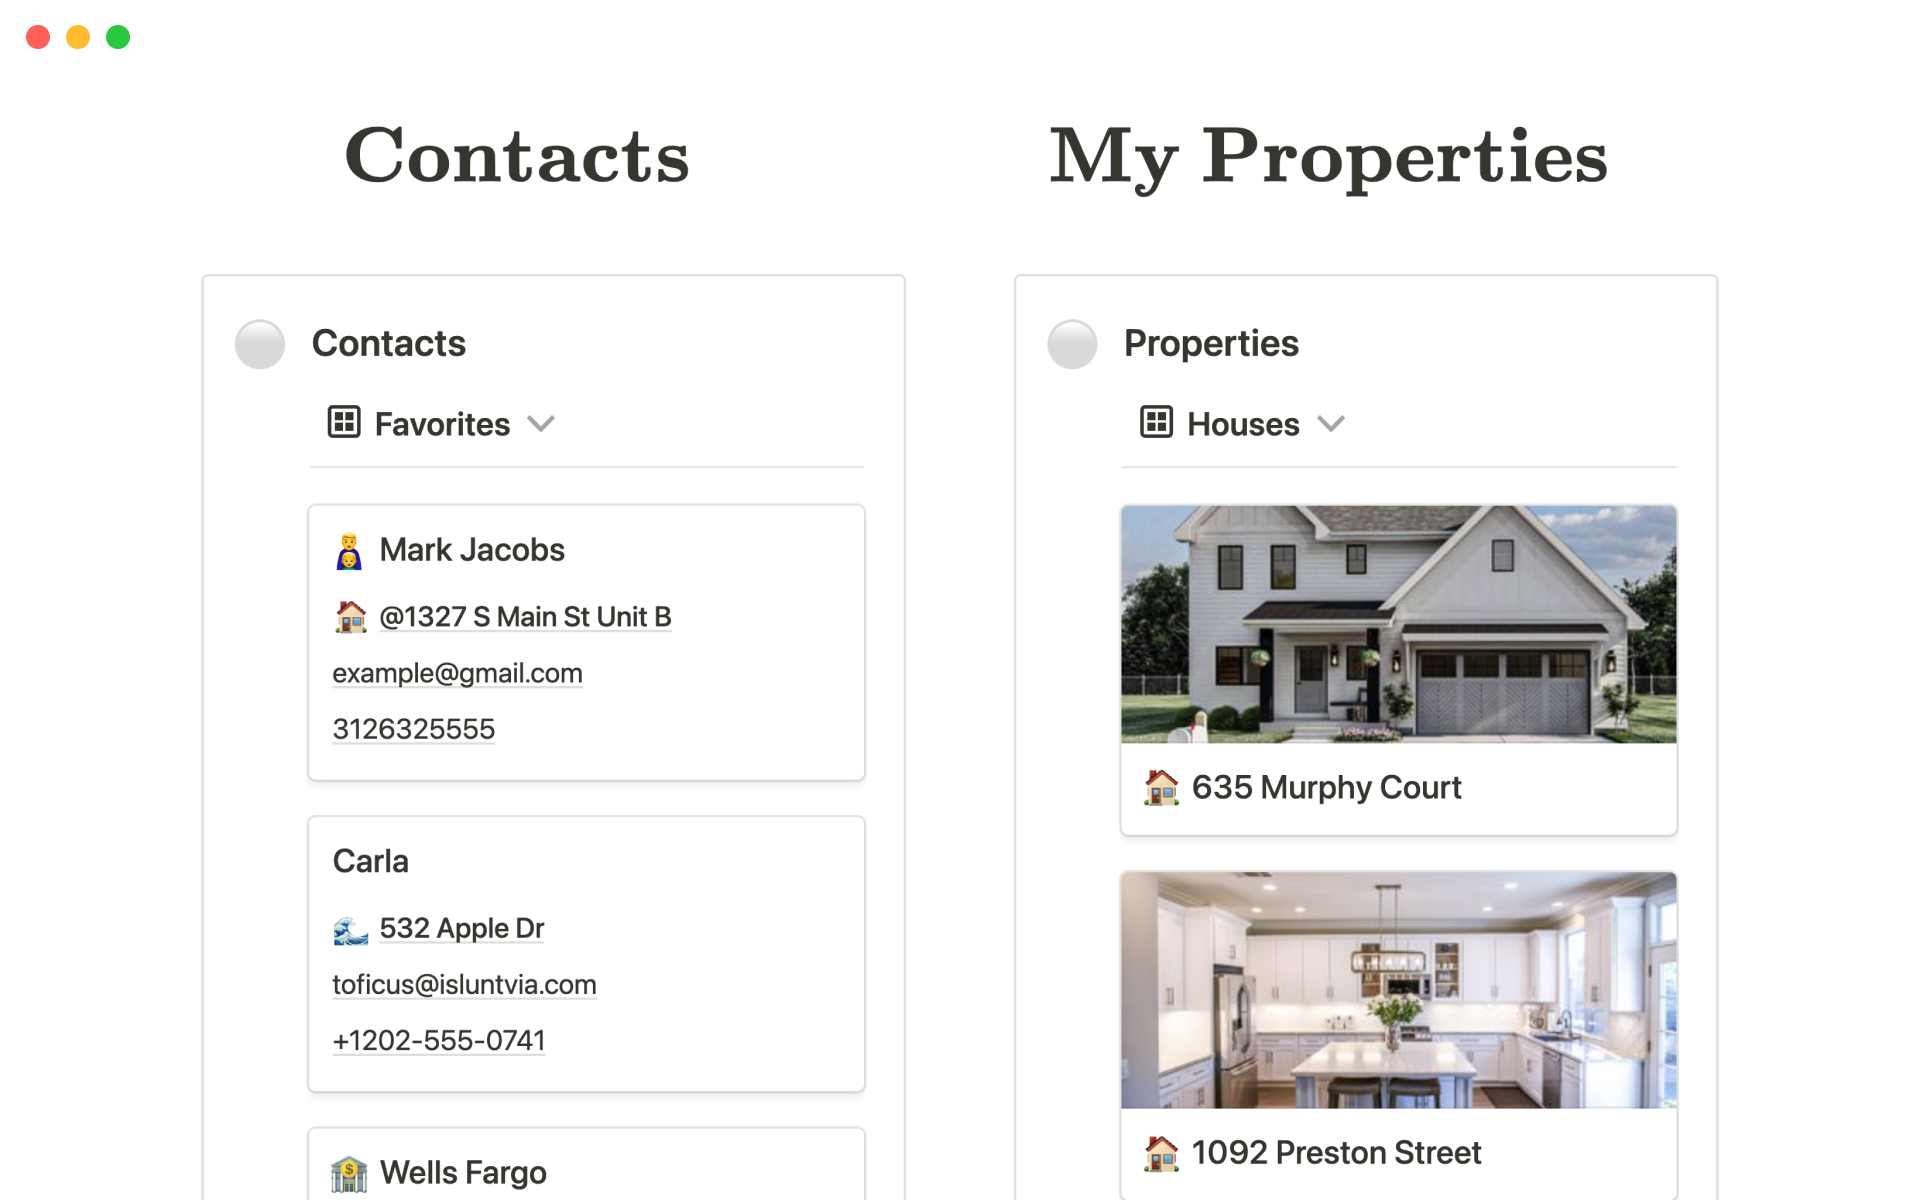 The ultimate property management tool for real estate investors and managers.